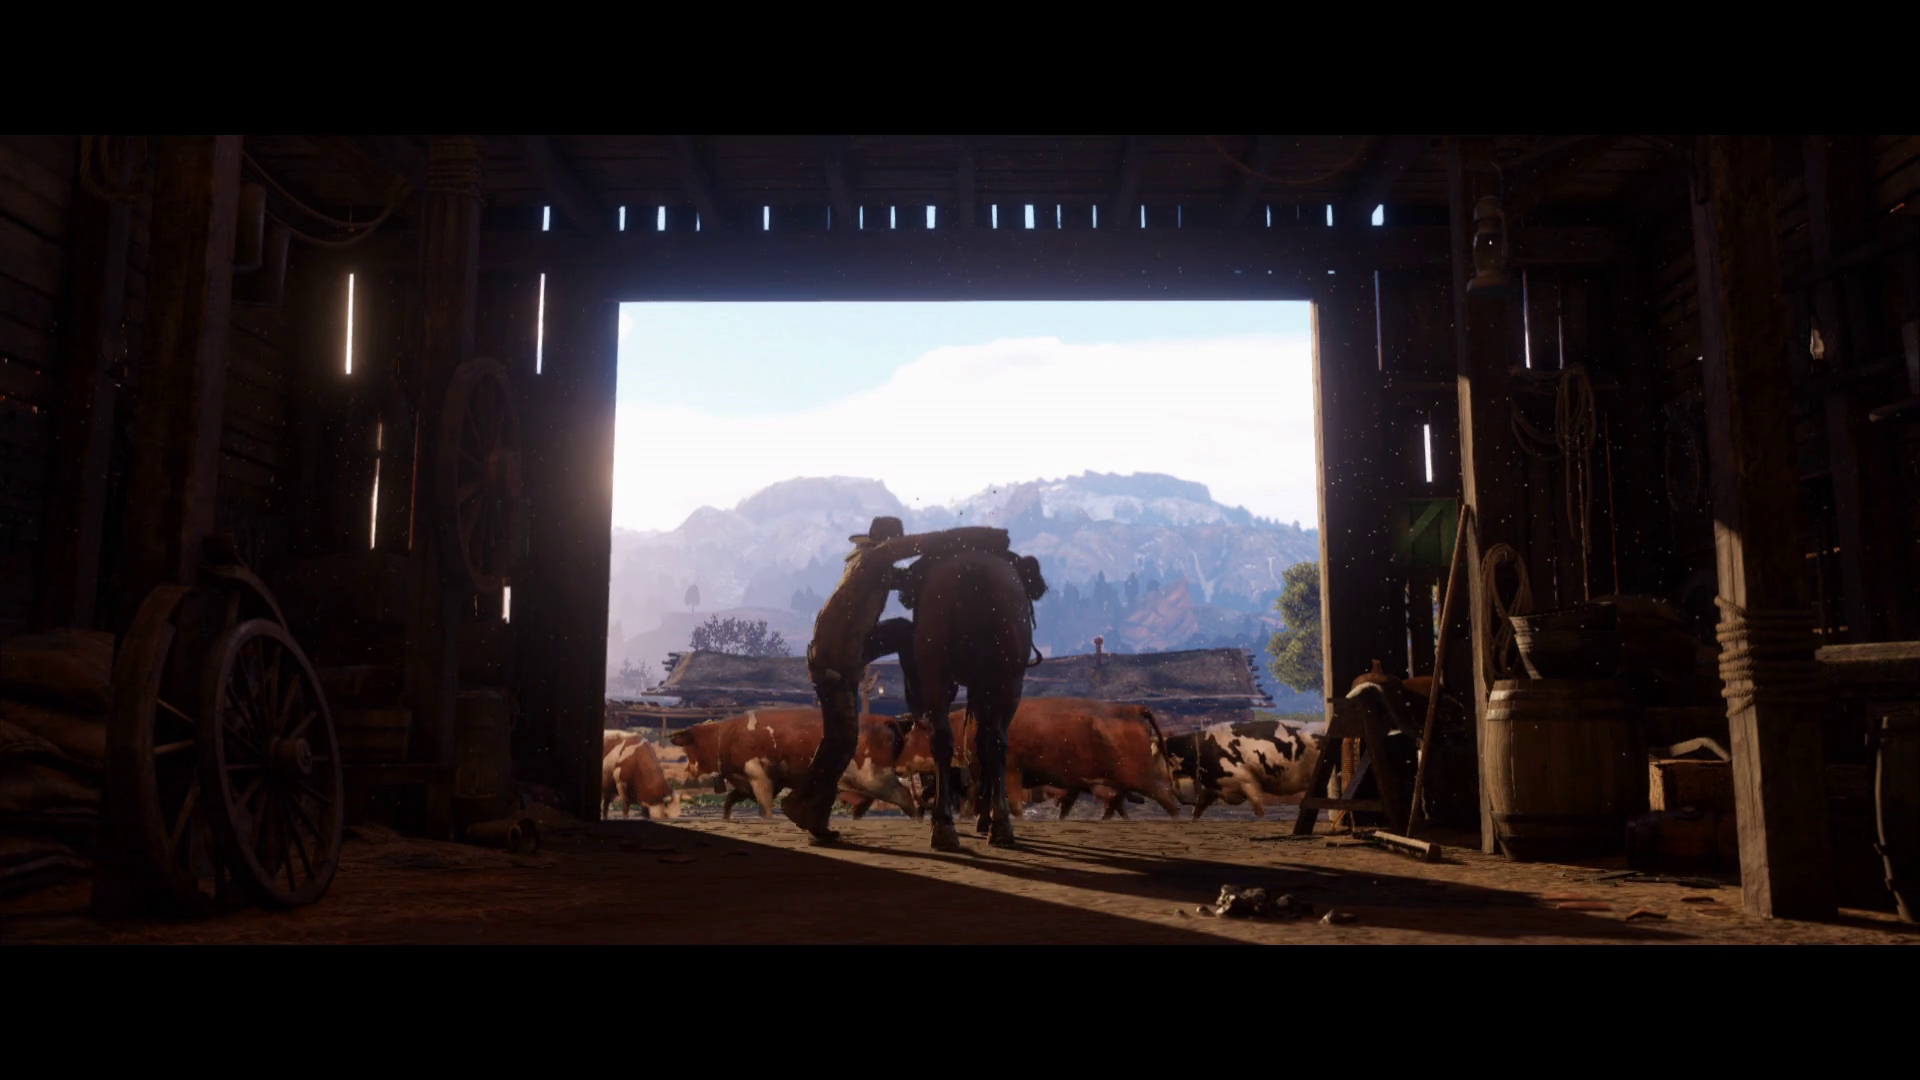 http://www.rdrvision.com/images/content/red-dead-redemption-2/trailer_1/red-dead-redemption-2_trailer-1_14.png